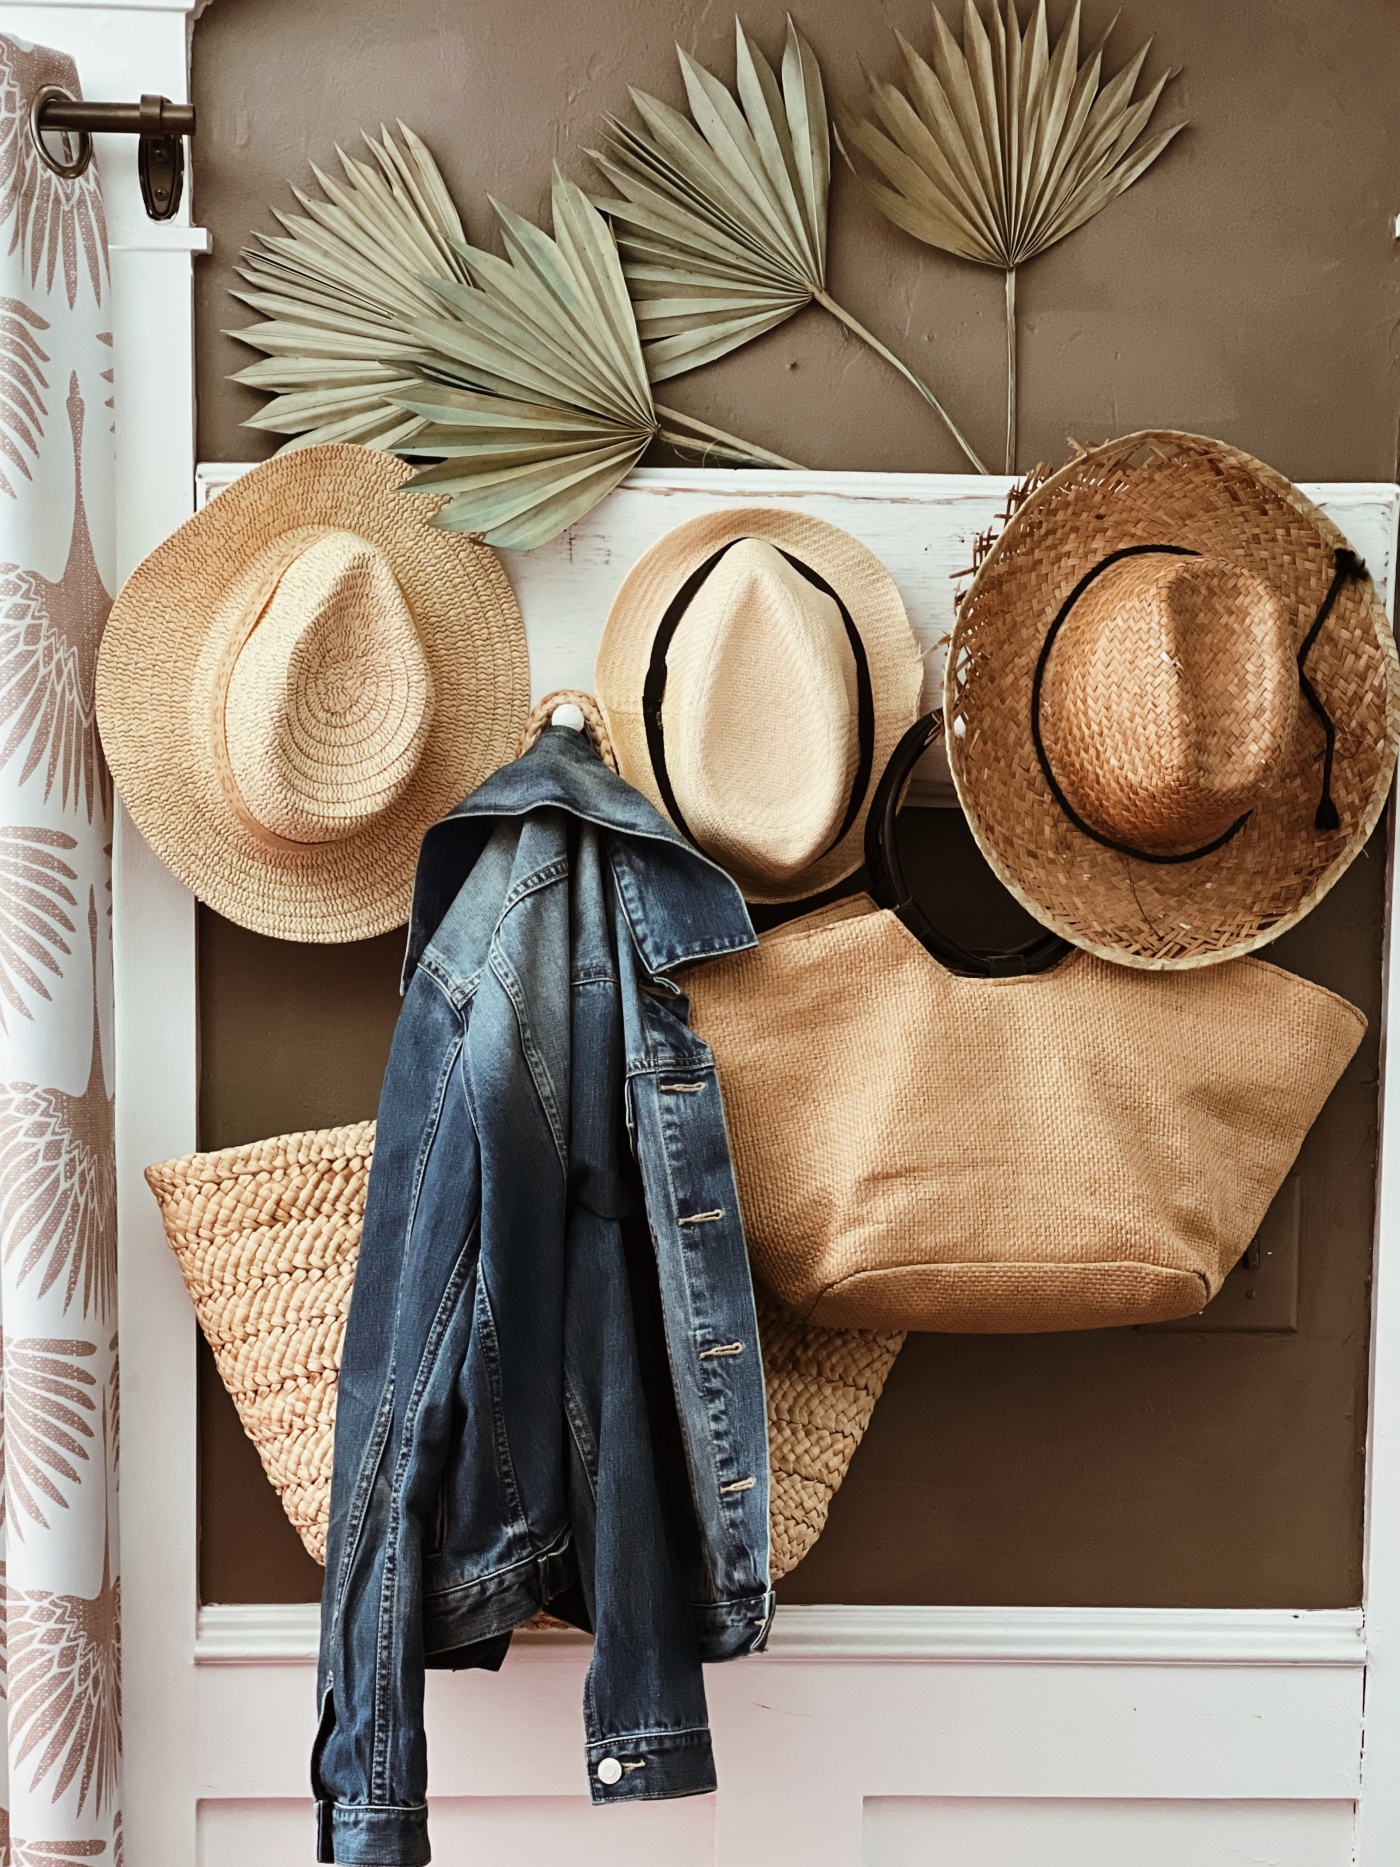 Decorating with Straw Hats - The Wicker House